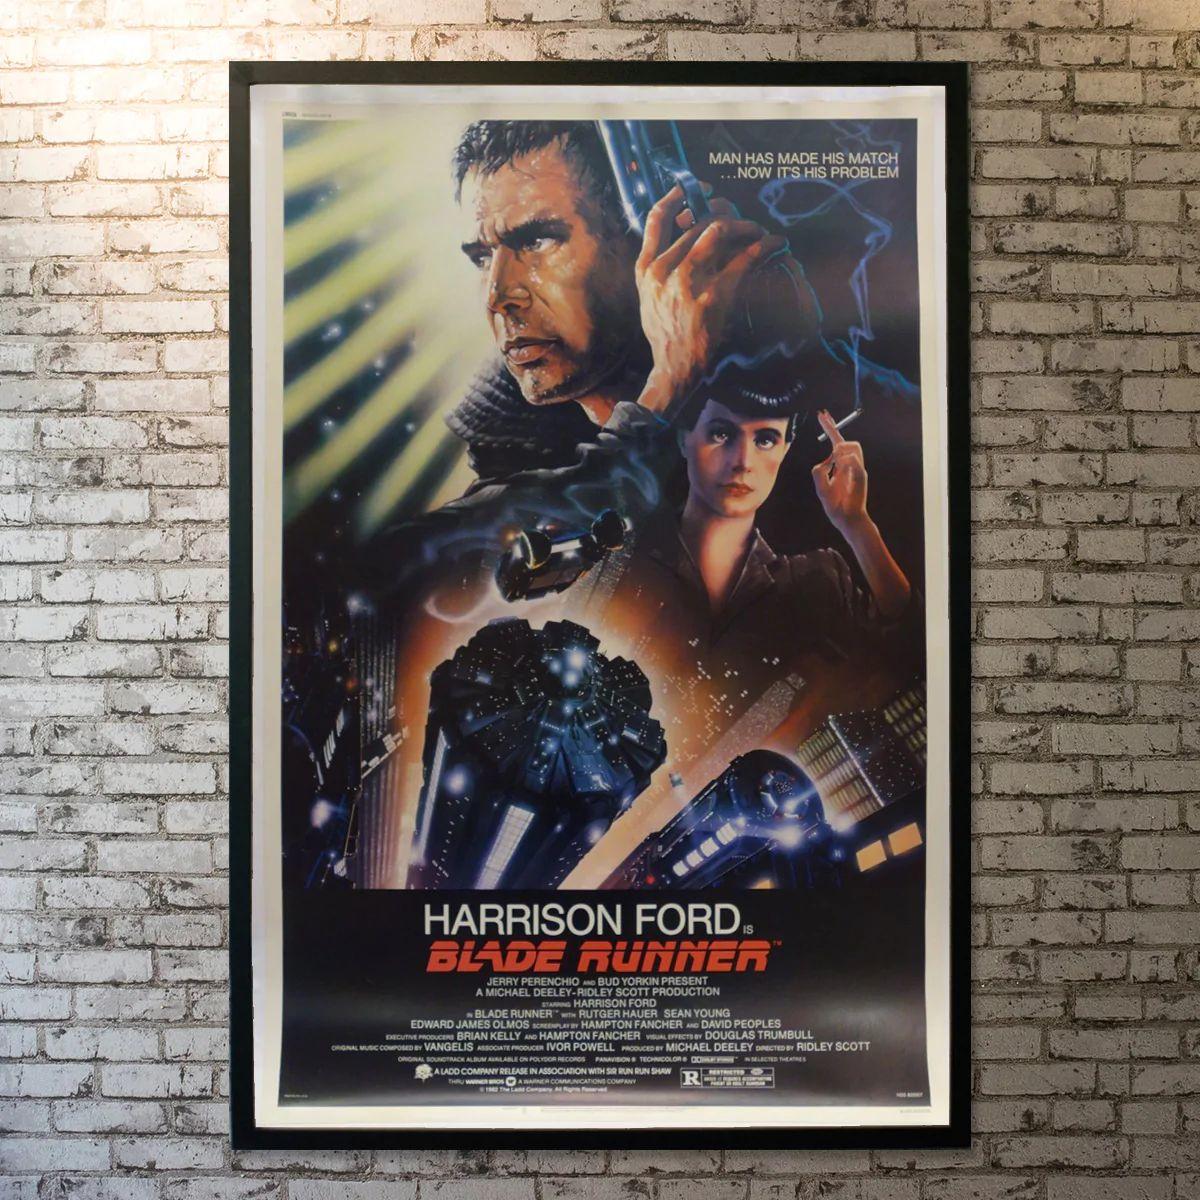 Blade Runner, Unframed Poster, 1982

Original US (40 X 60 Inches). A blade runner must pursue and terminate four replicants who stole a ship in space, and have returned to Earth to find their creator.

Year: 1982
Nationality: Original